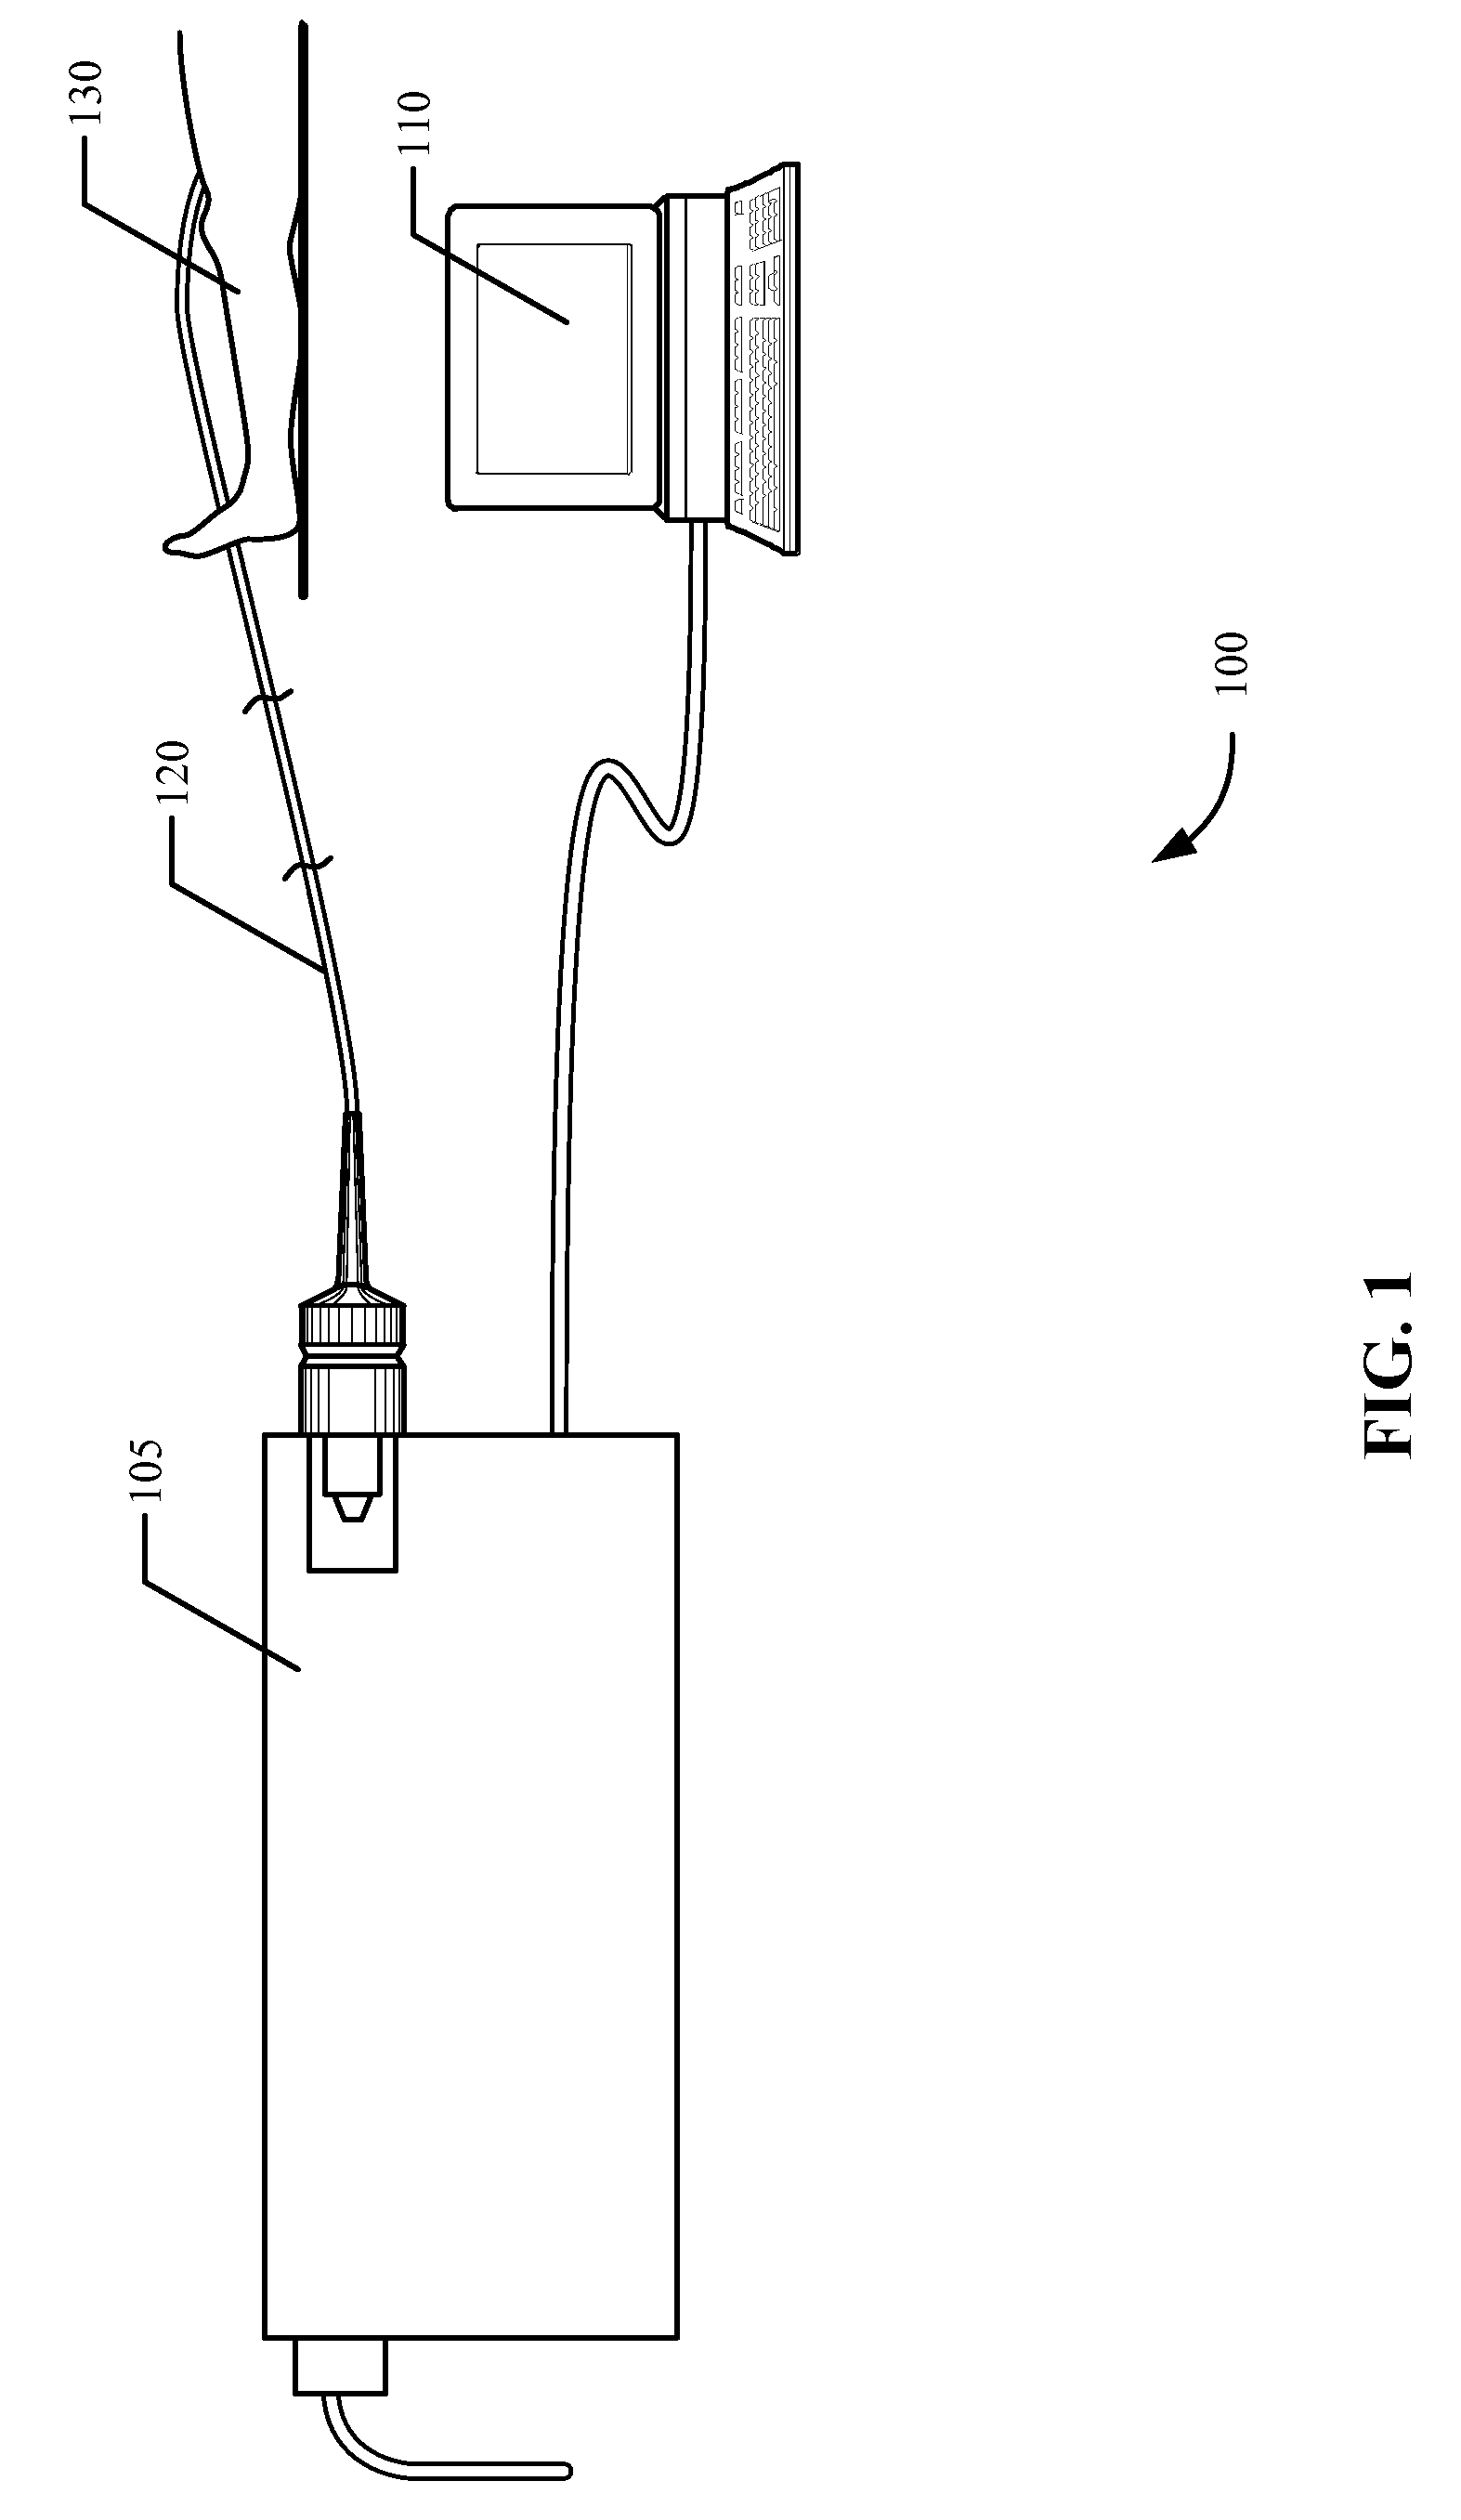 Intra-Vascular Device With Pressure Detection Capabilities Using Pressure Sensitive Material